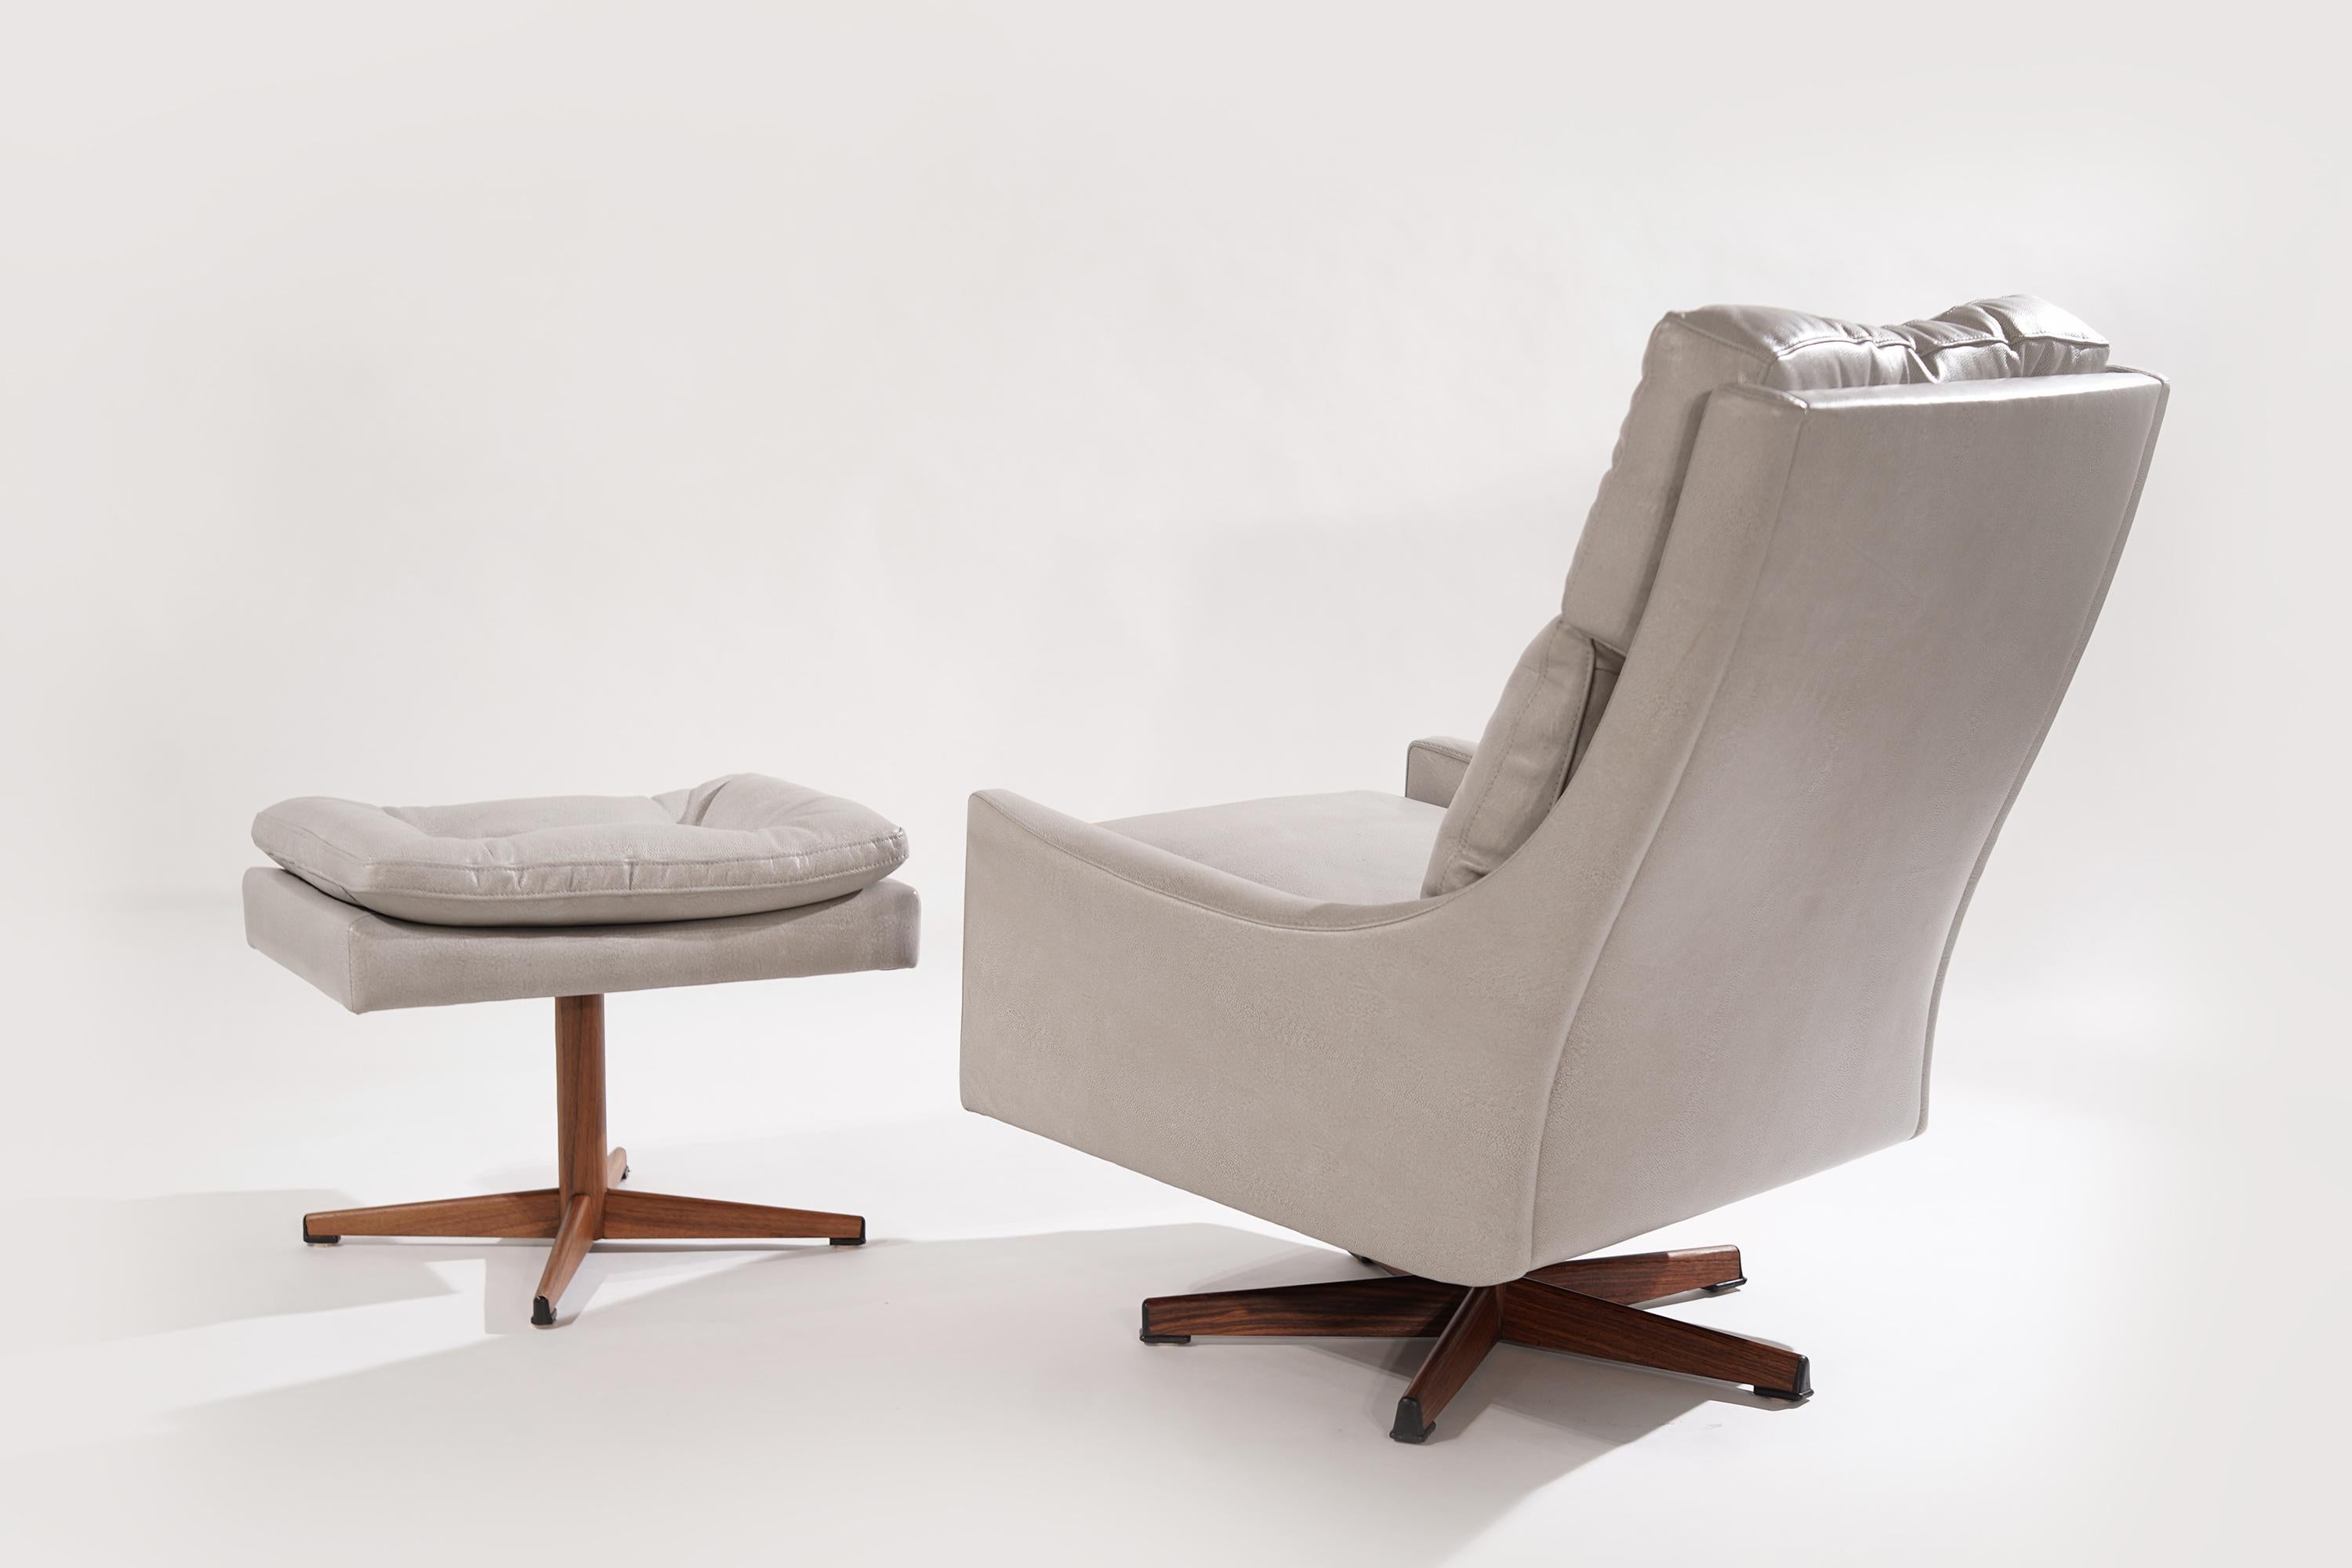 20th Century Lounge Chair and Ottoman by Ib Kofod-Larsen, Denmark, 1950s